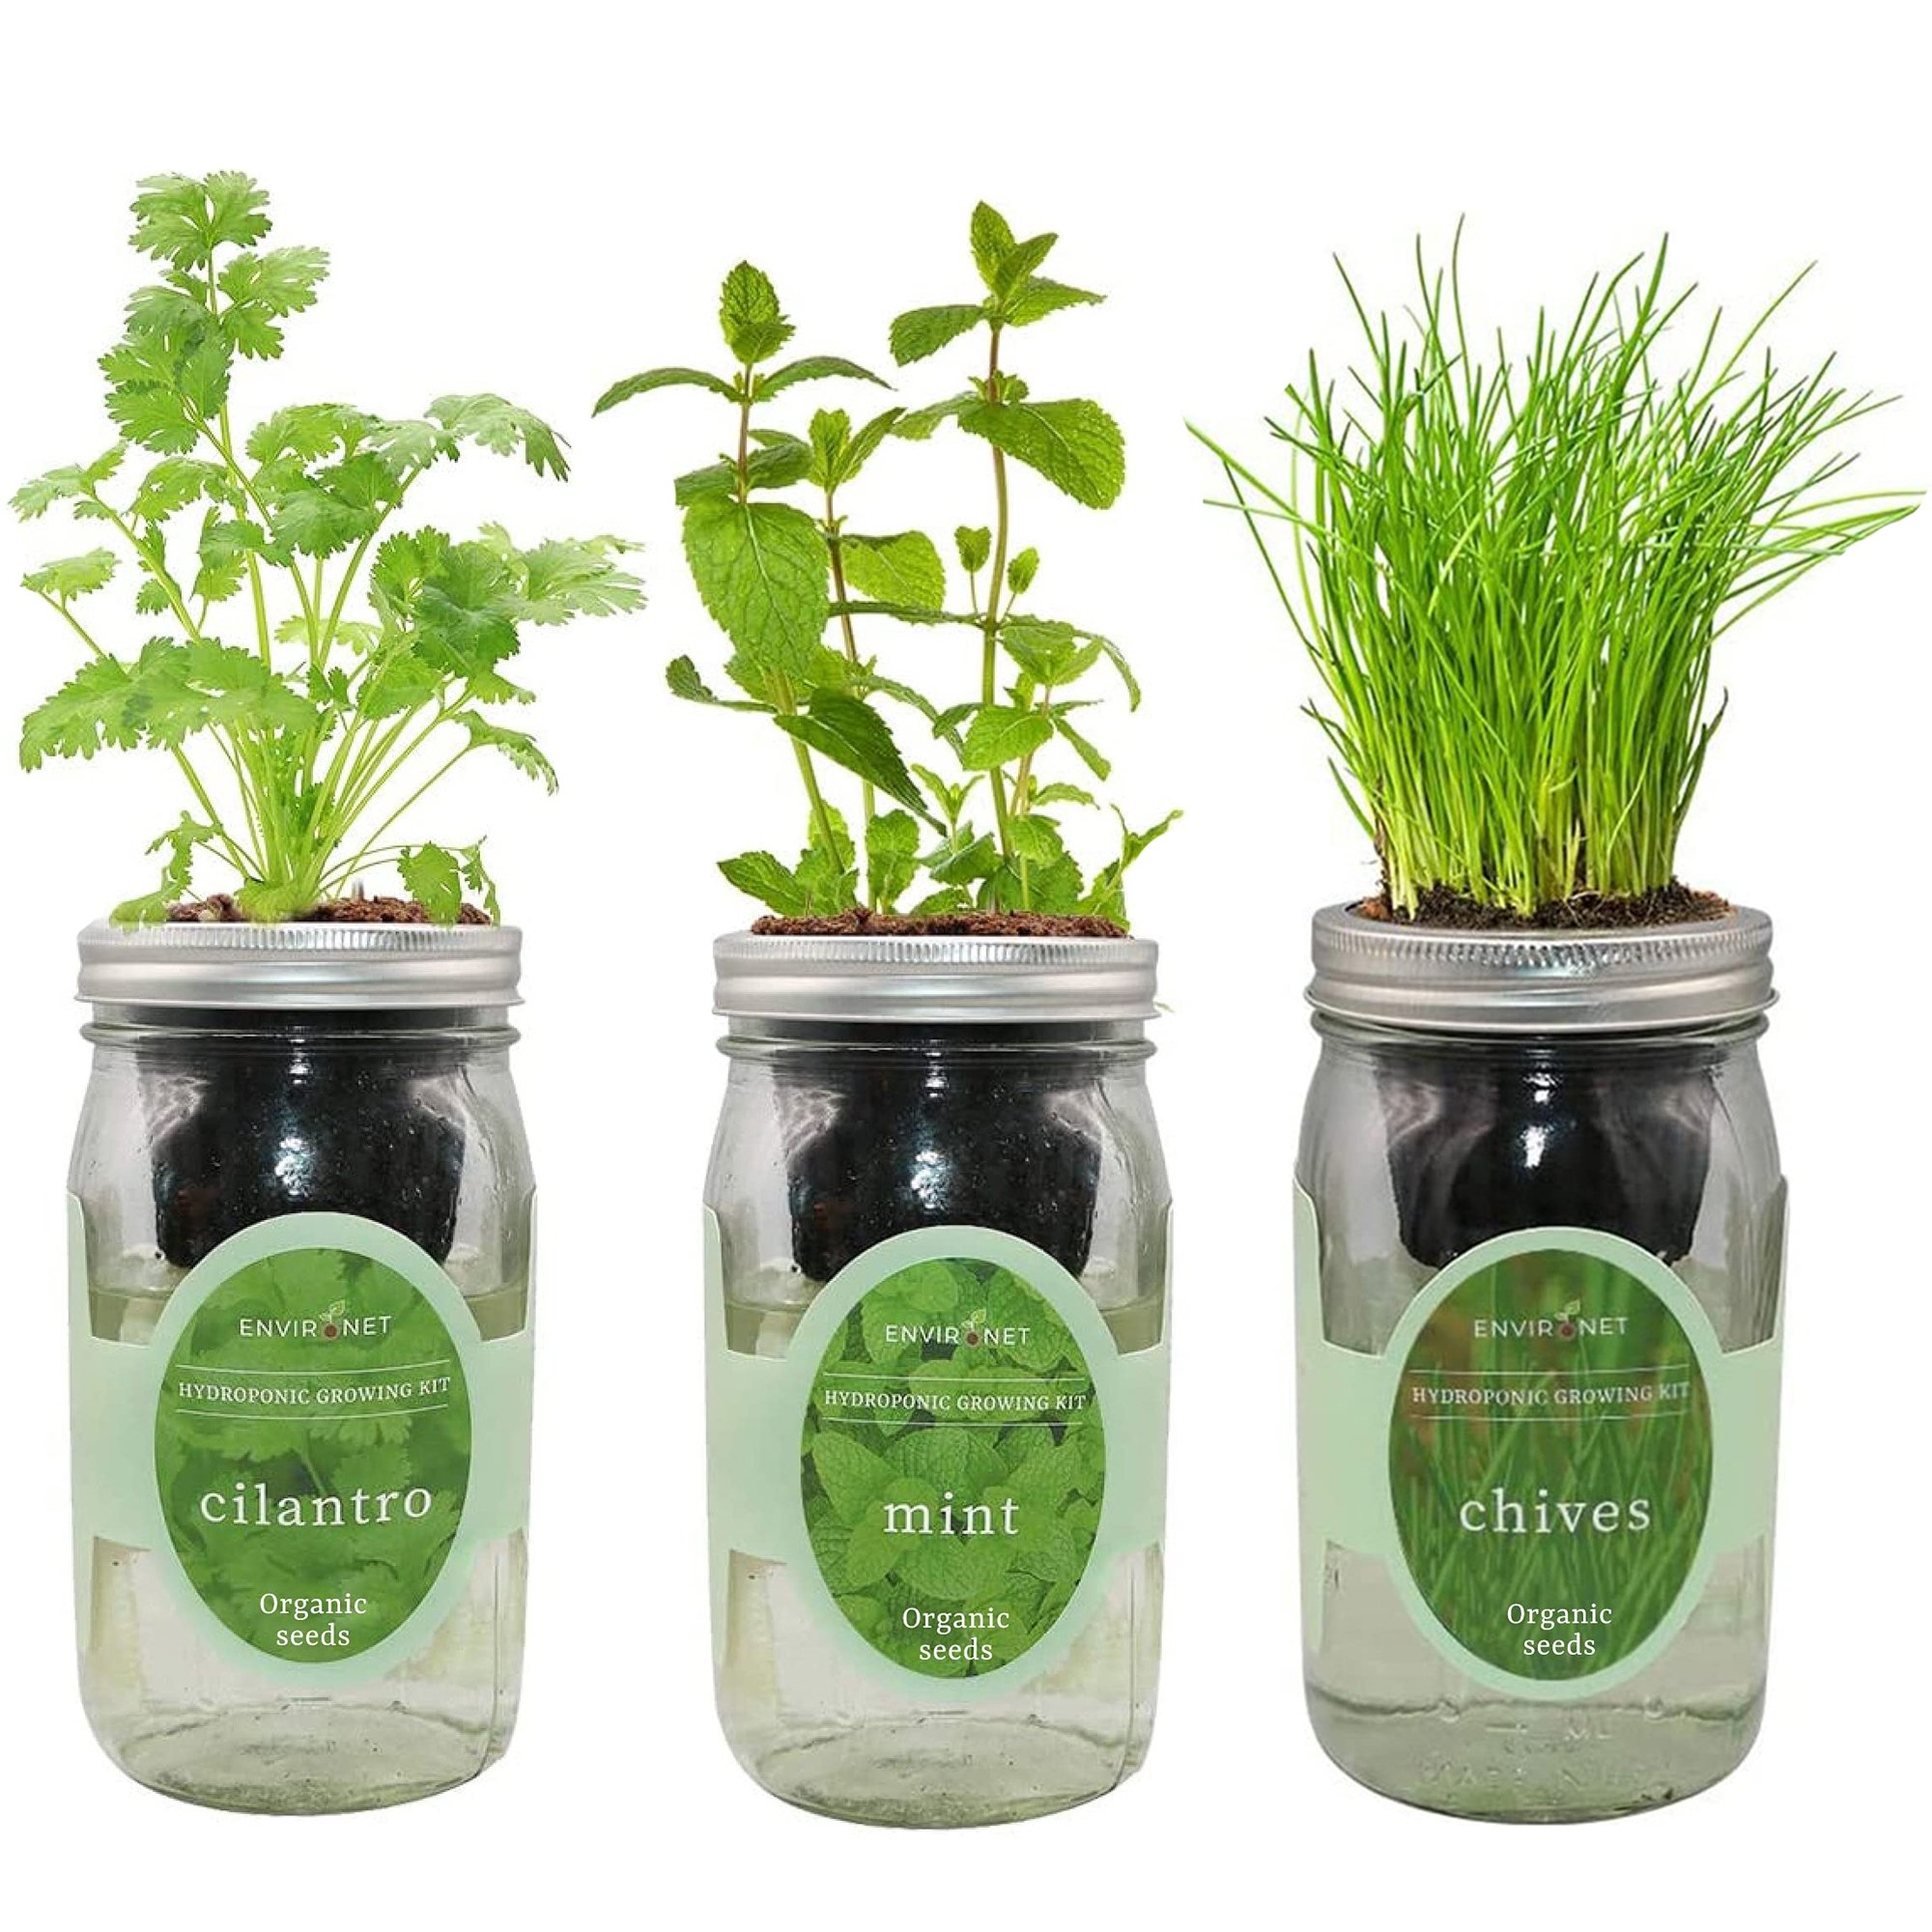 Hydroponic Herb Growing Kit Set with Organic Seeds - Cilantro, Mint, Chives